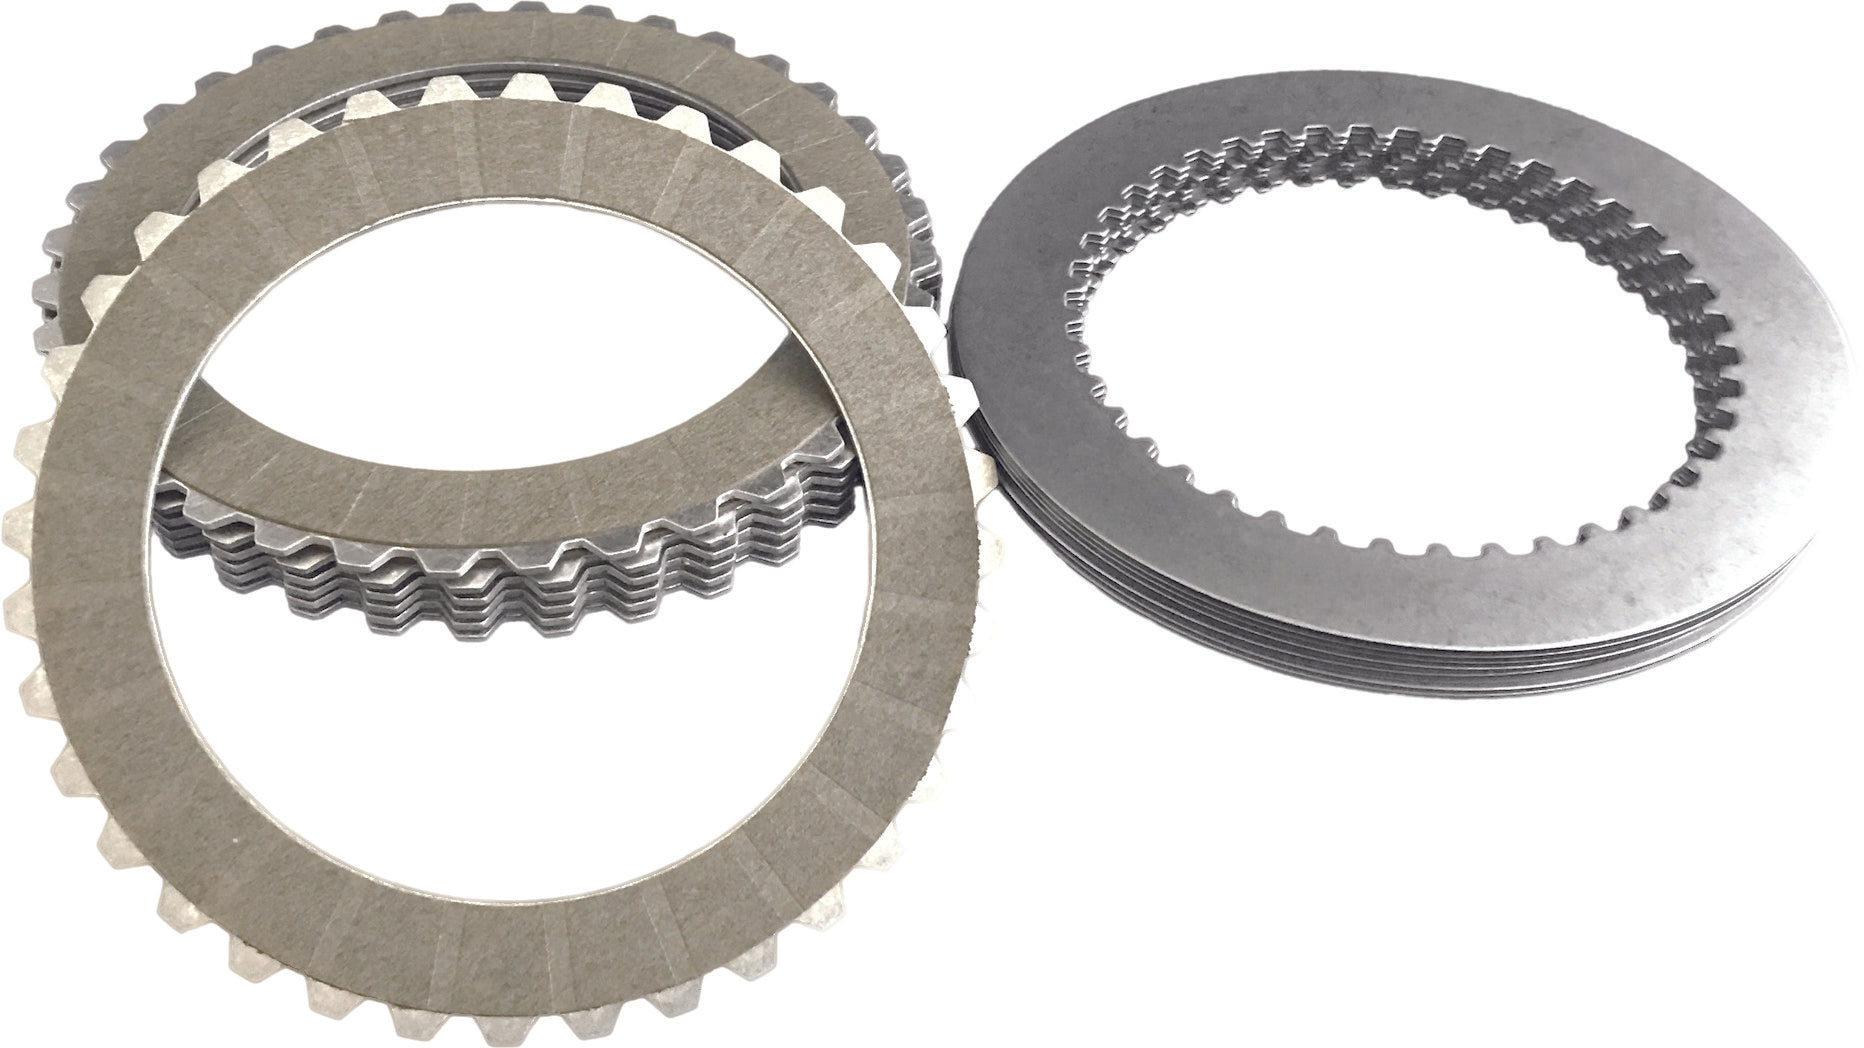 ENERGY ONE, ENERGY ONE E1 REPLACEMENT CLUTCH KIT FOR BRUTE III EXTREME 07 FLT RP-0001